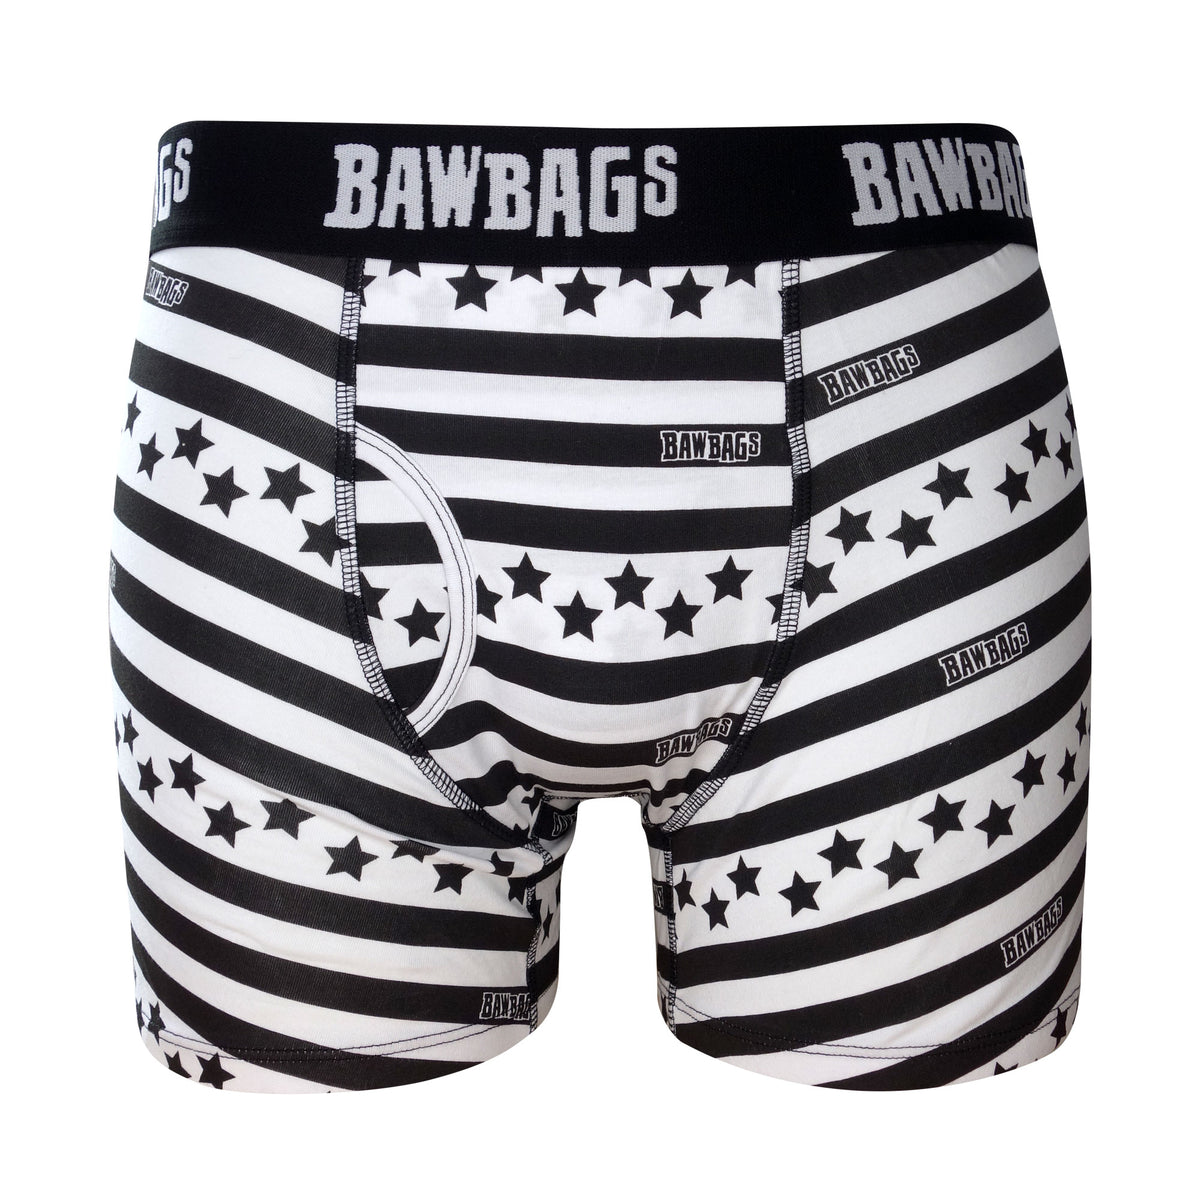 Stars and Stripes Cotton Boxer Shorts